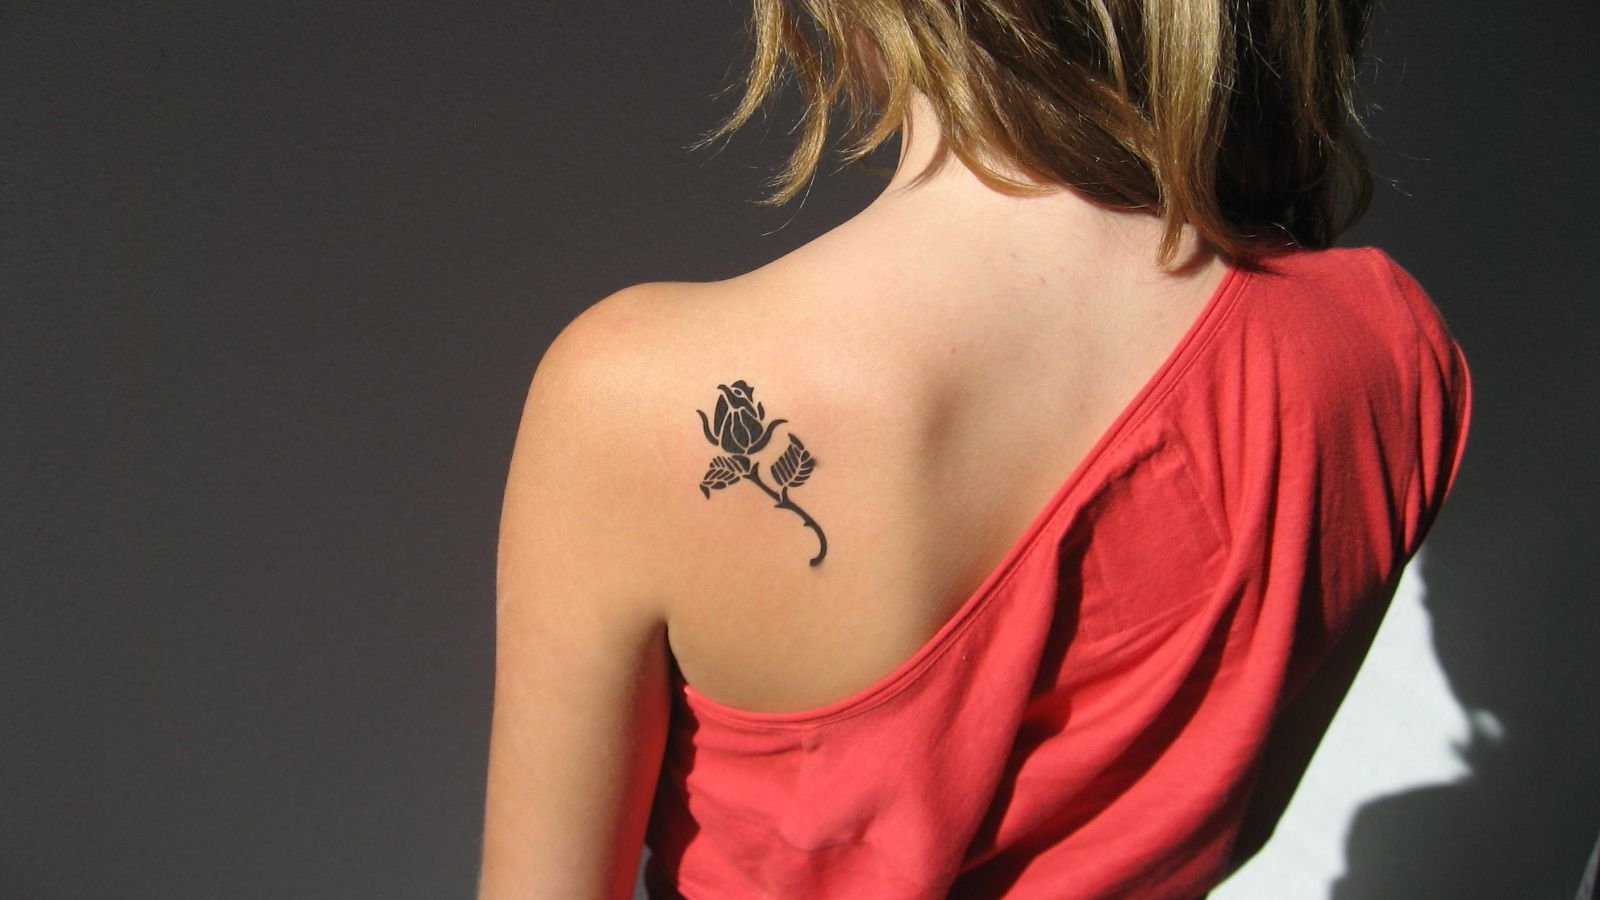 Girl Tattoos On Shoulder Blade 30 Small Cute Tattoos For Girls intended for dimensions 1600 X 900